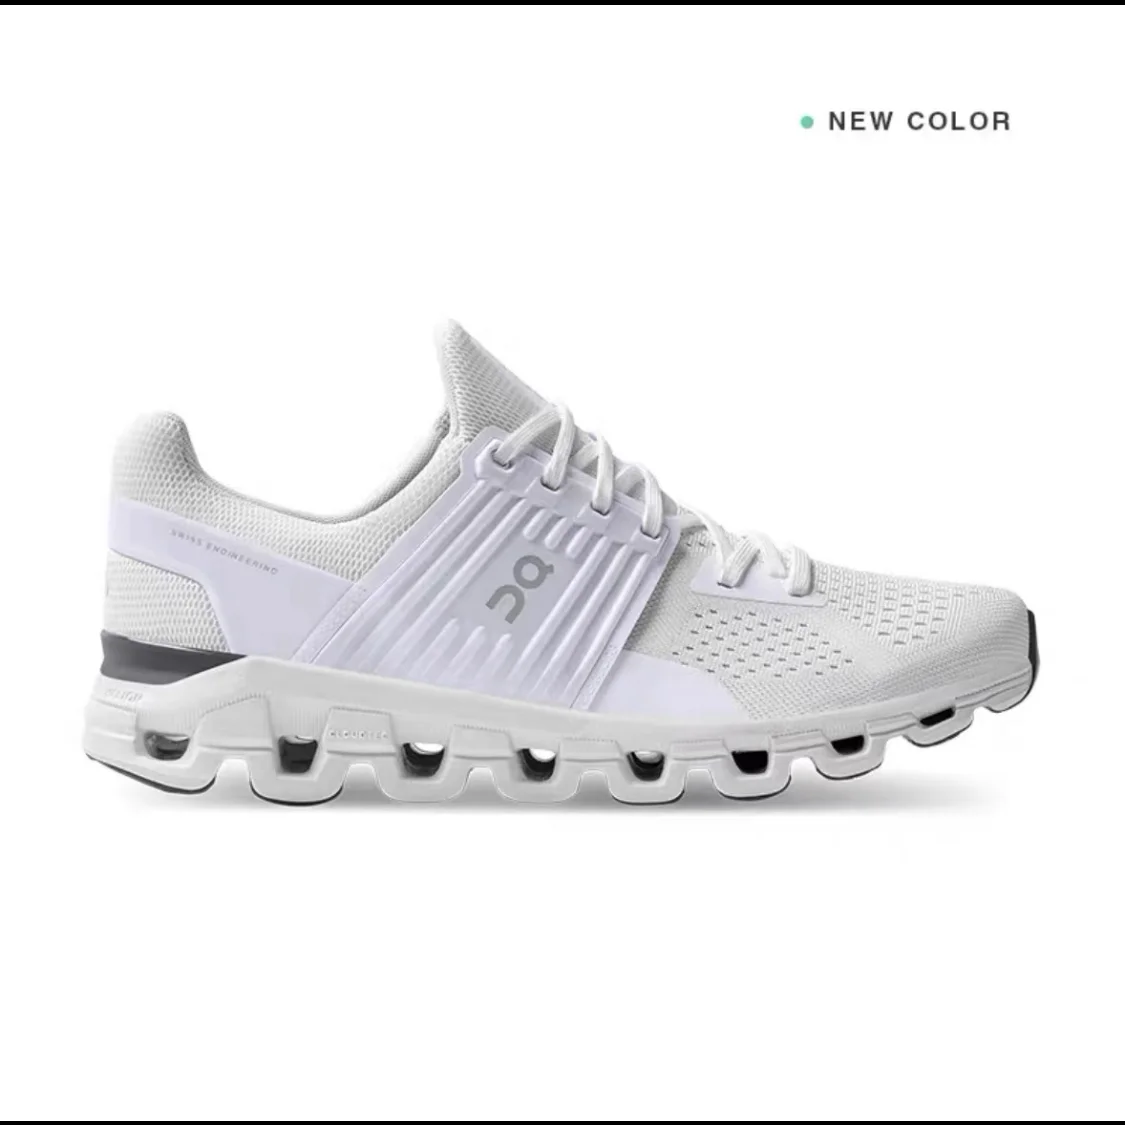 

Cloud X Men Women Cloudswift Runner Shoes Unisex Breathable Ultralight Running Cushion Casual Sneakers Top Original On Quality